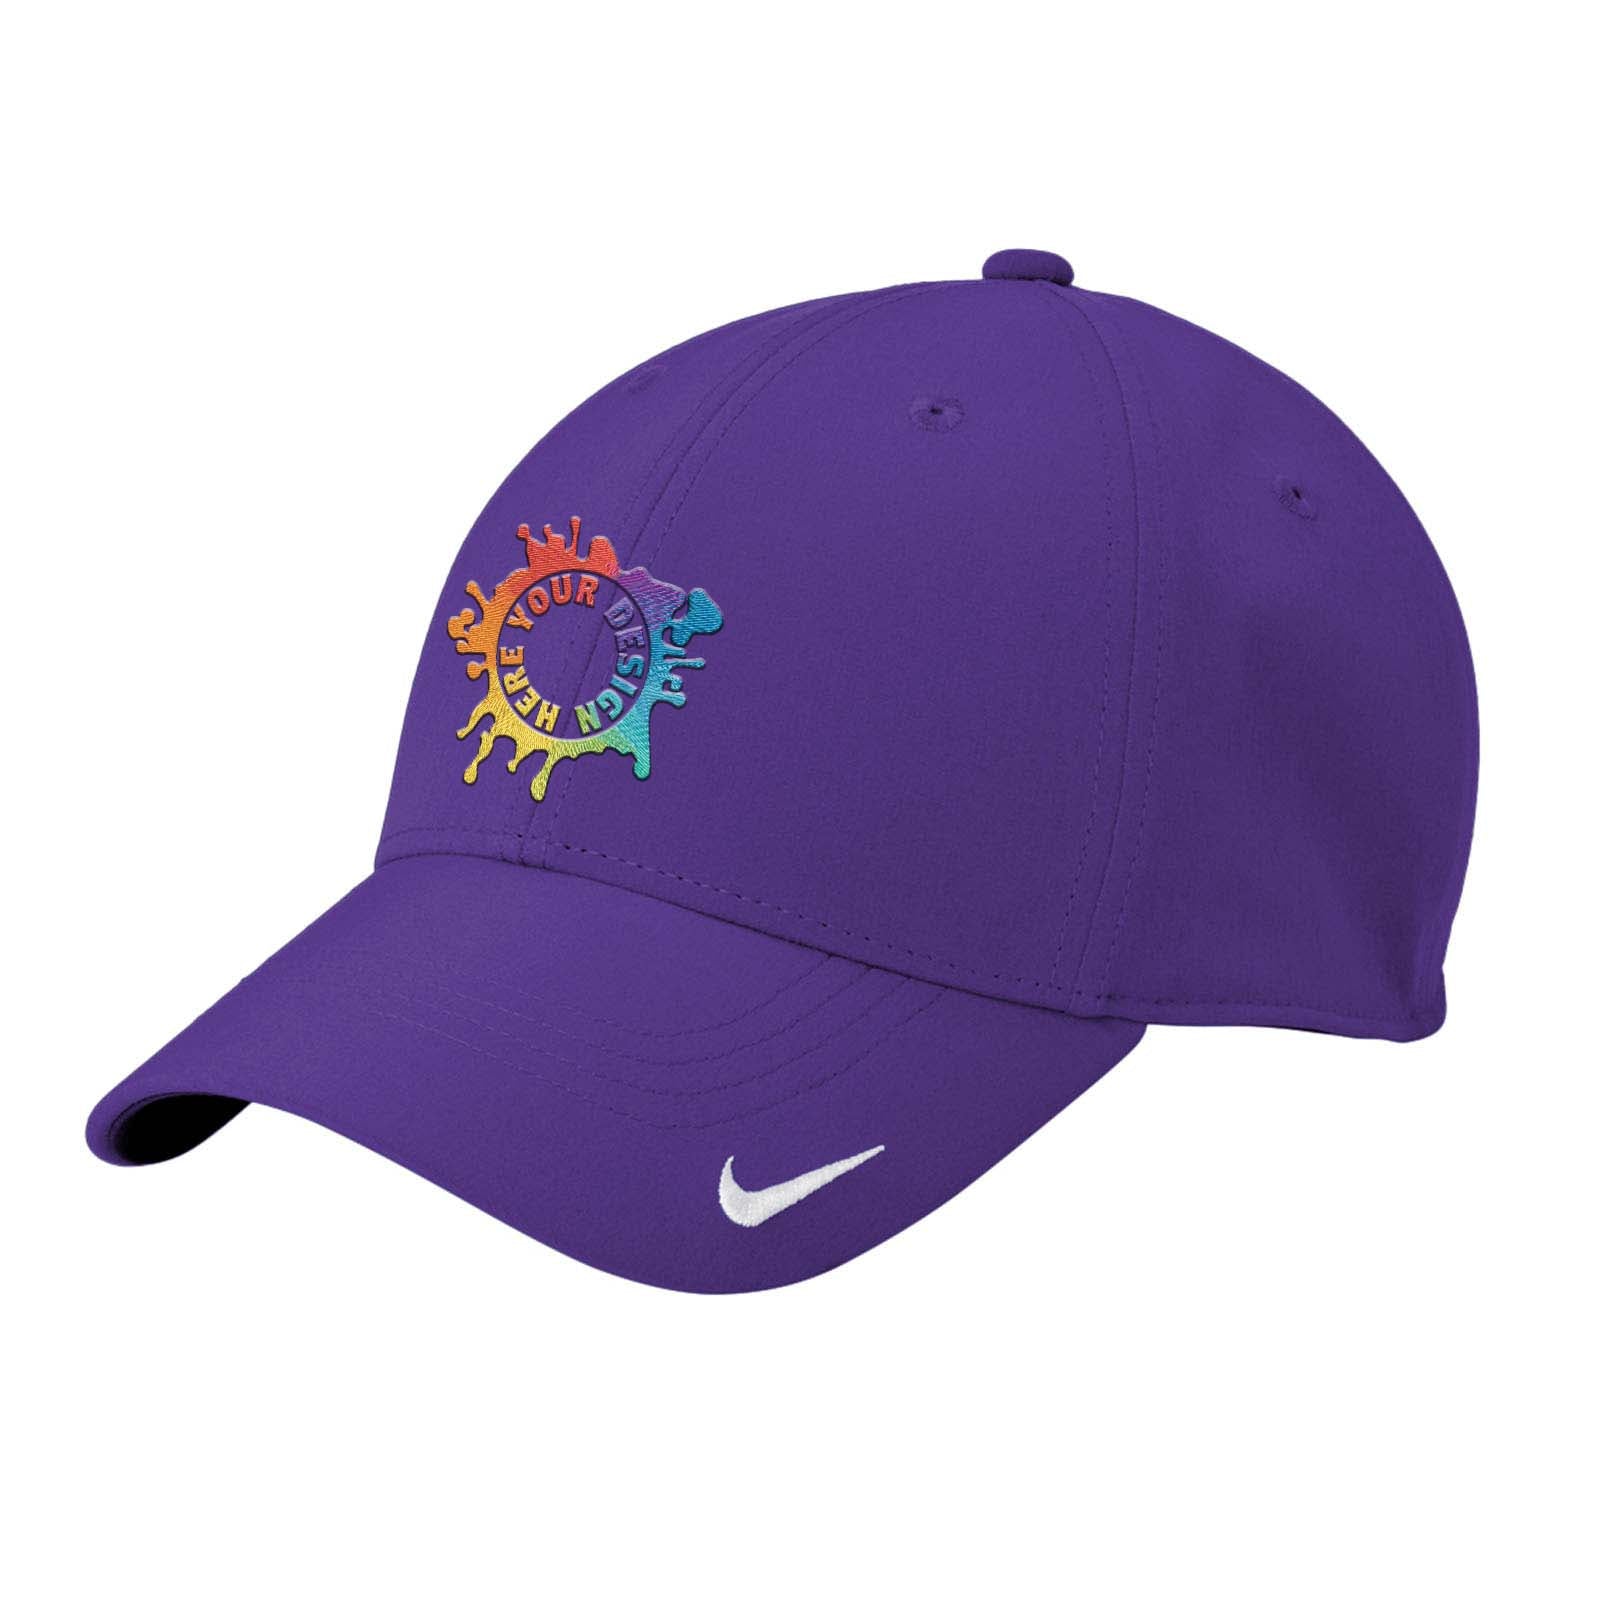 Nike Dri-FIT Legacy Cap Embroidery - BEST SELLING GOLF HAT - Mato & Hash